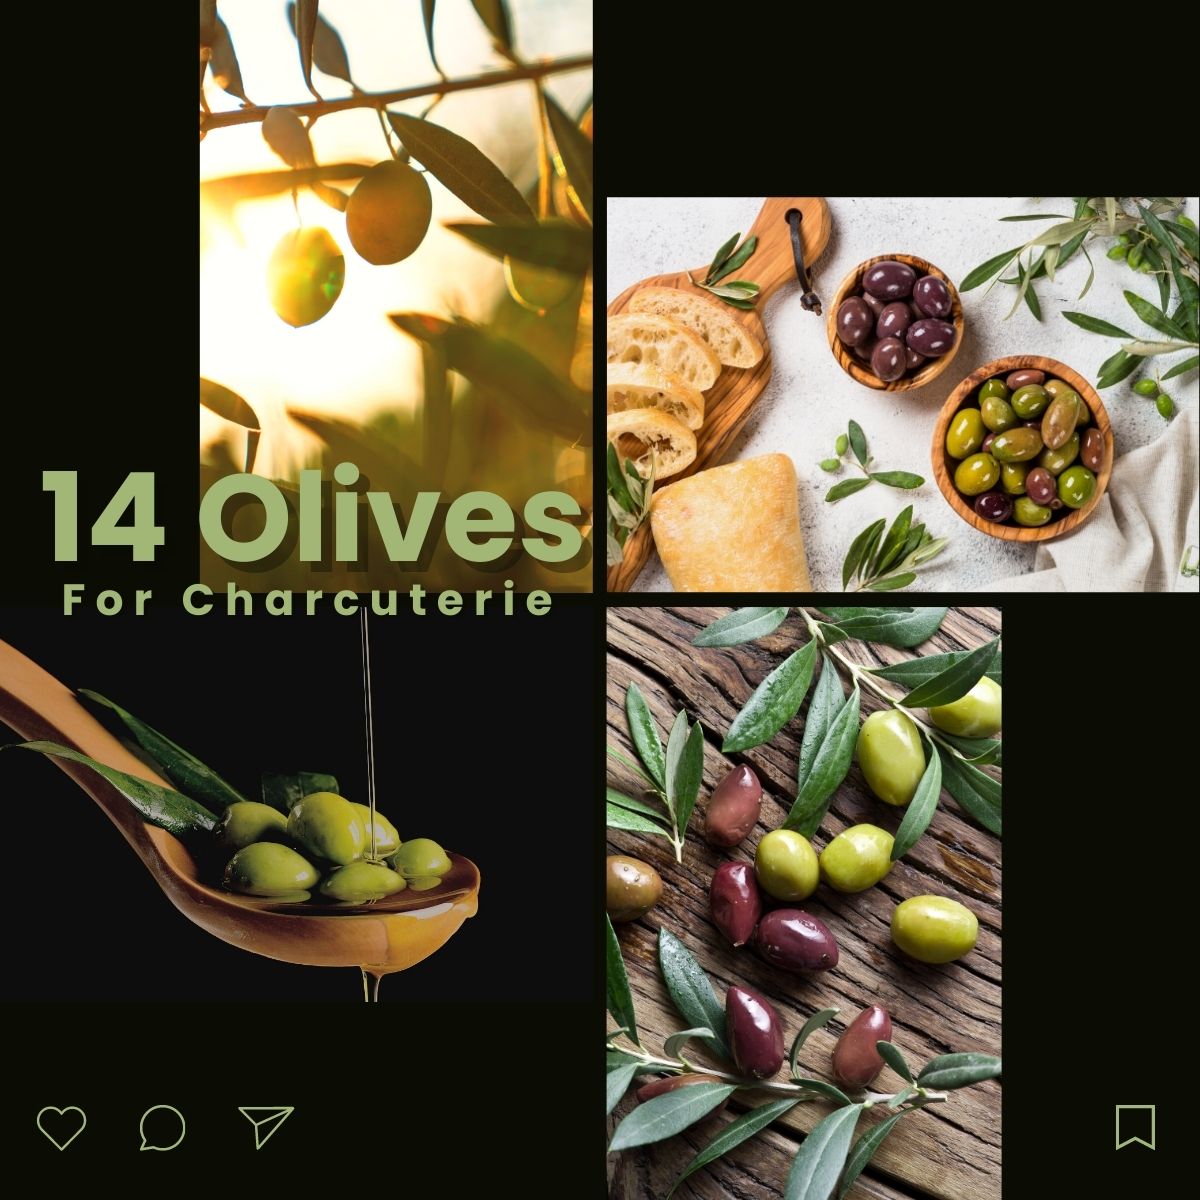 graphic design image of 14 different olives for charcuterie